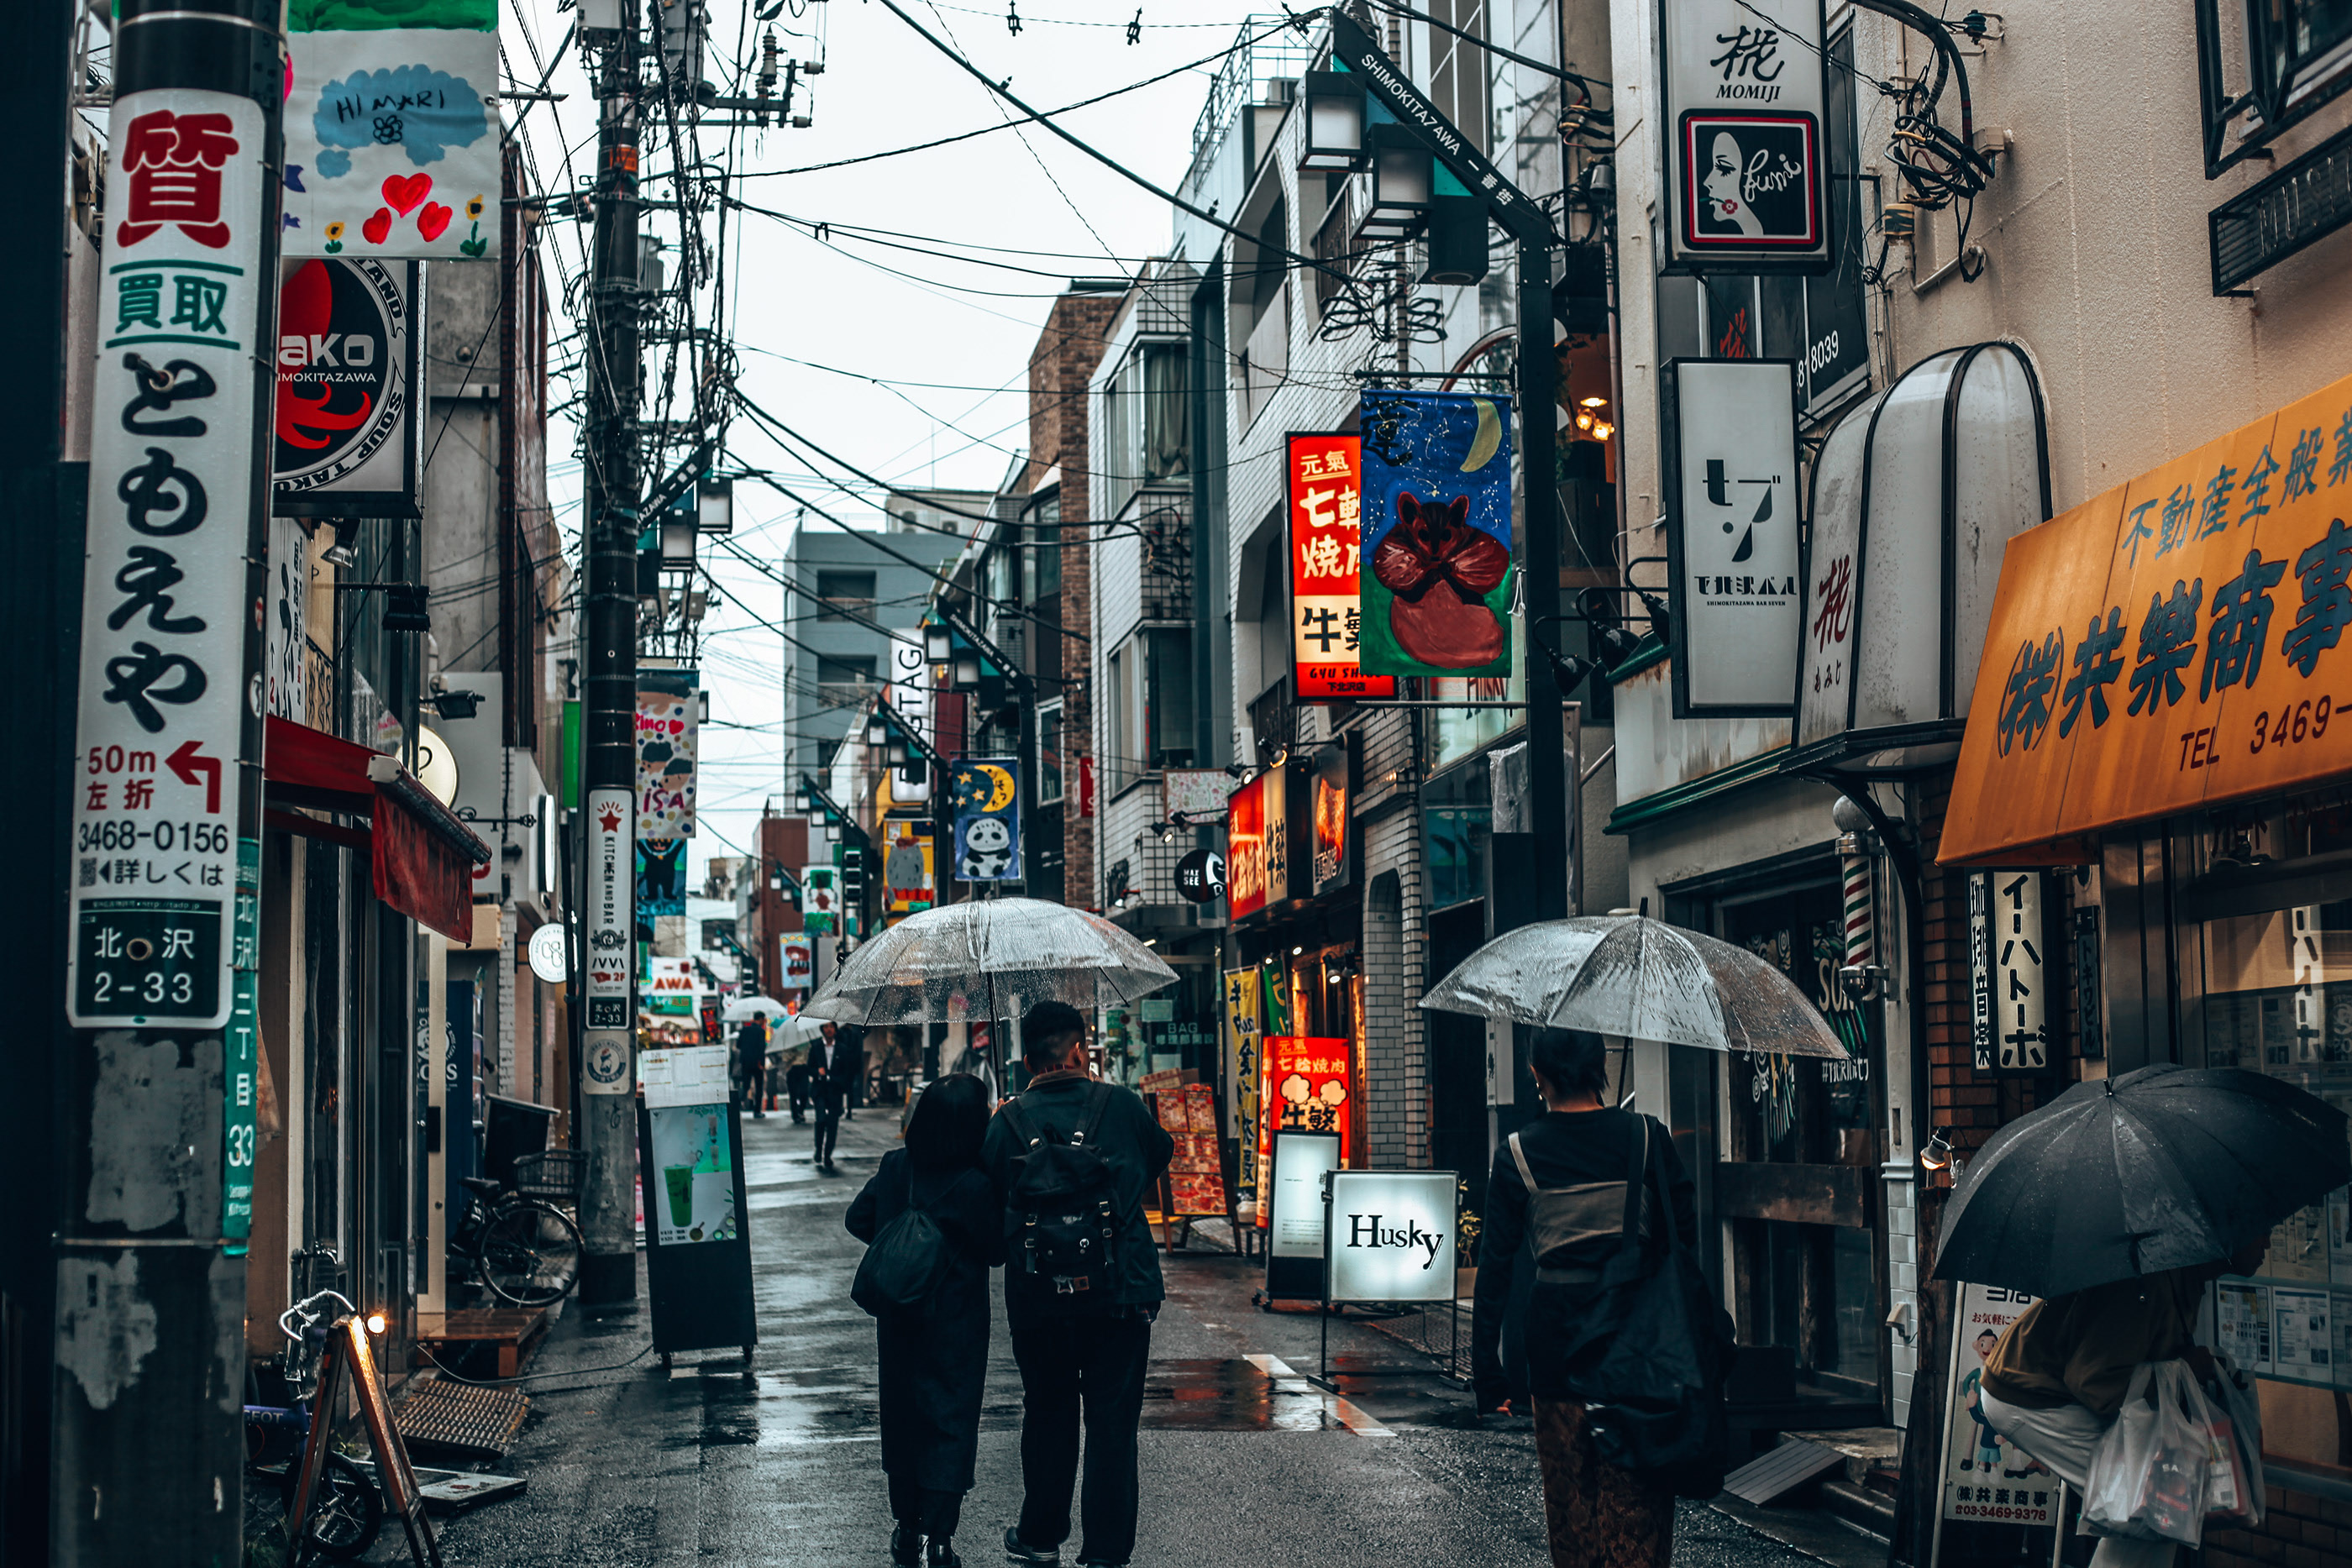 Streets of Japan on Behance